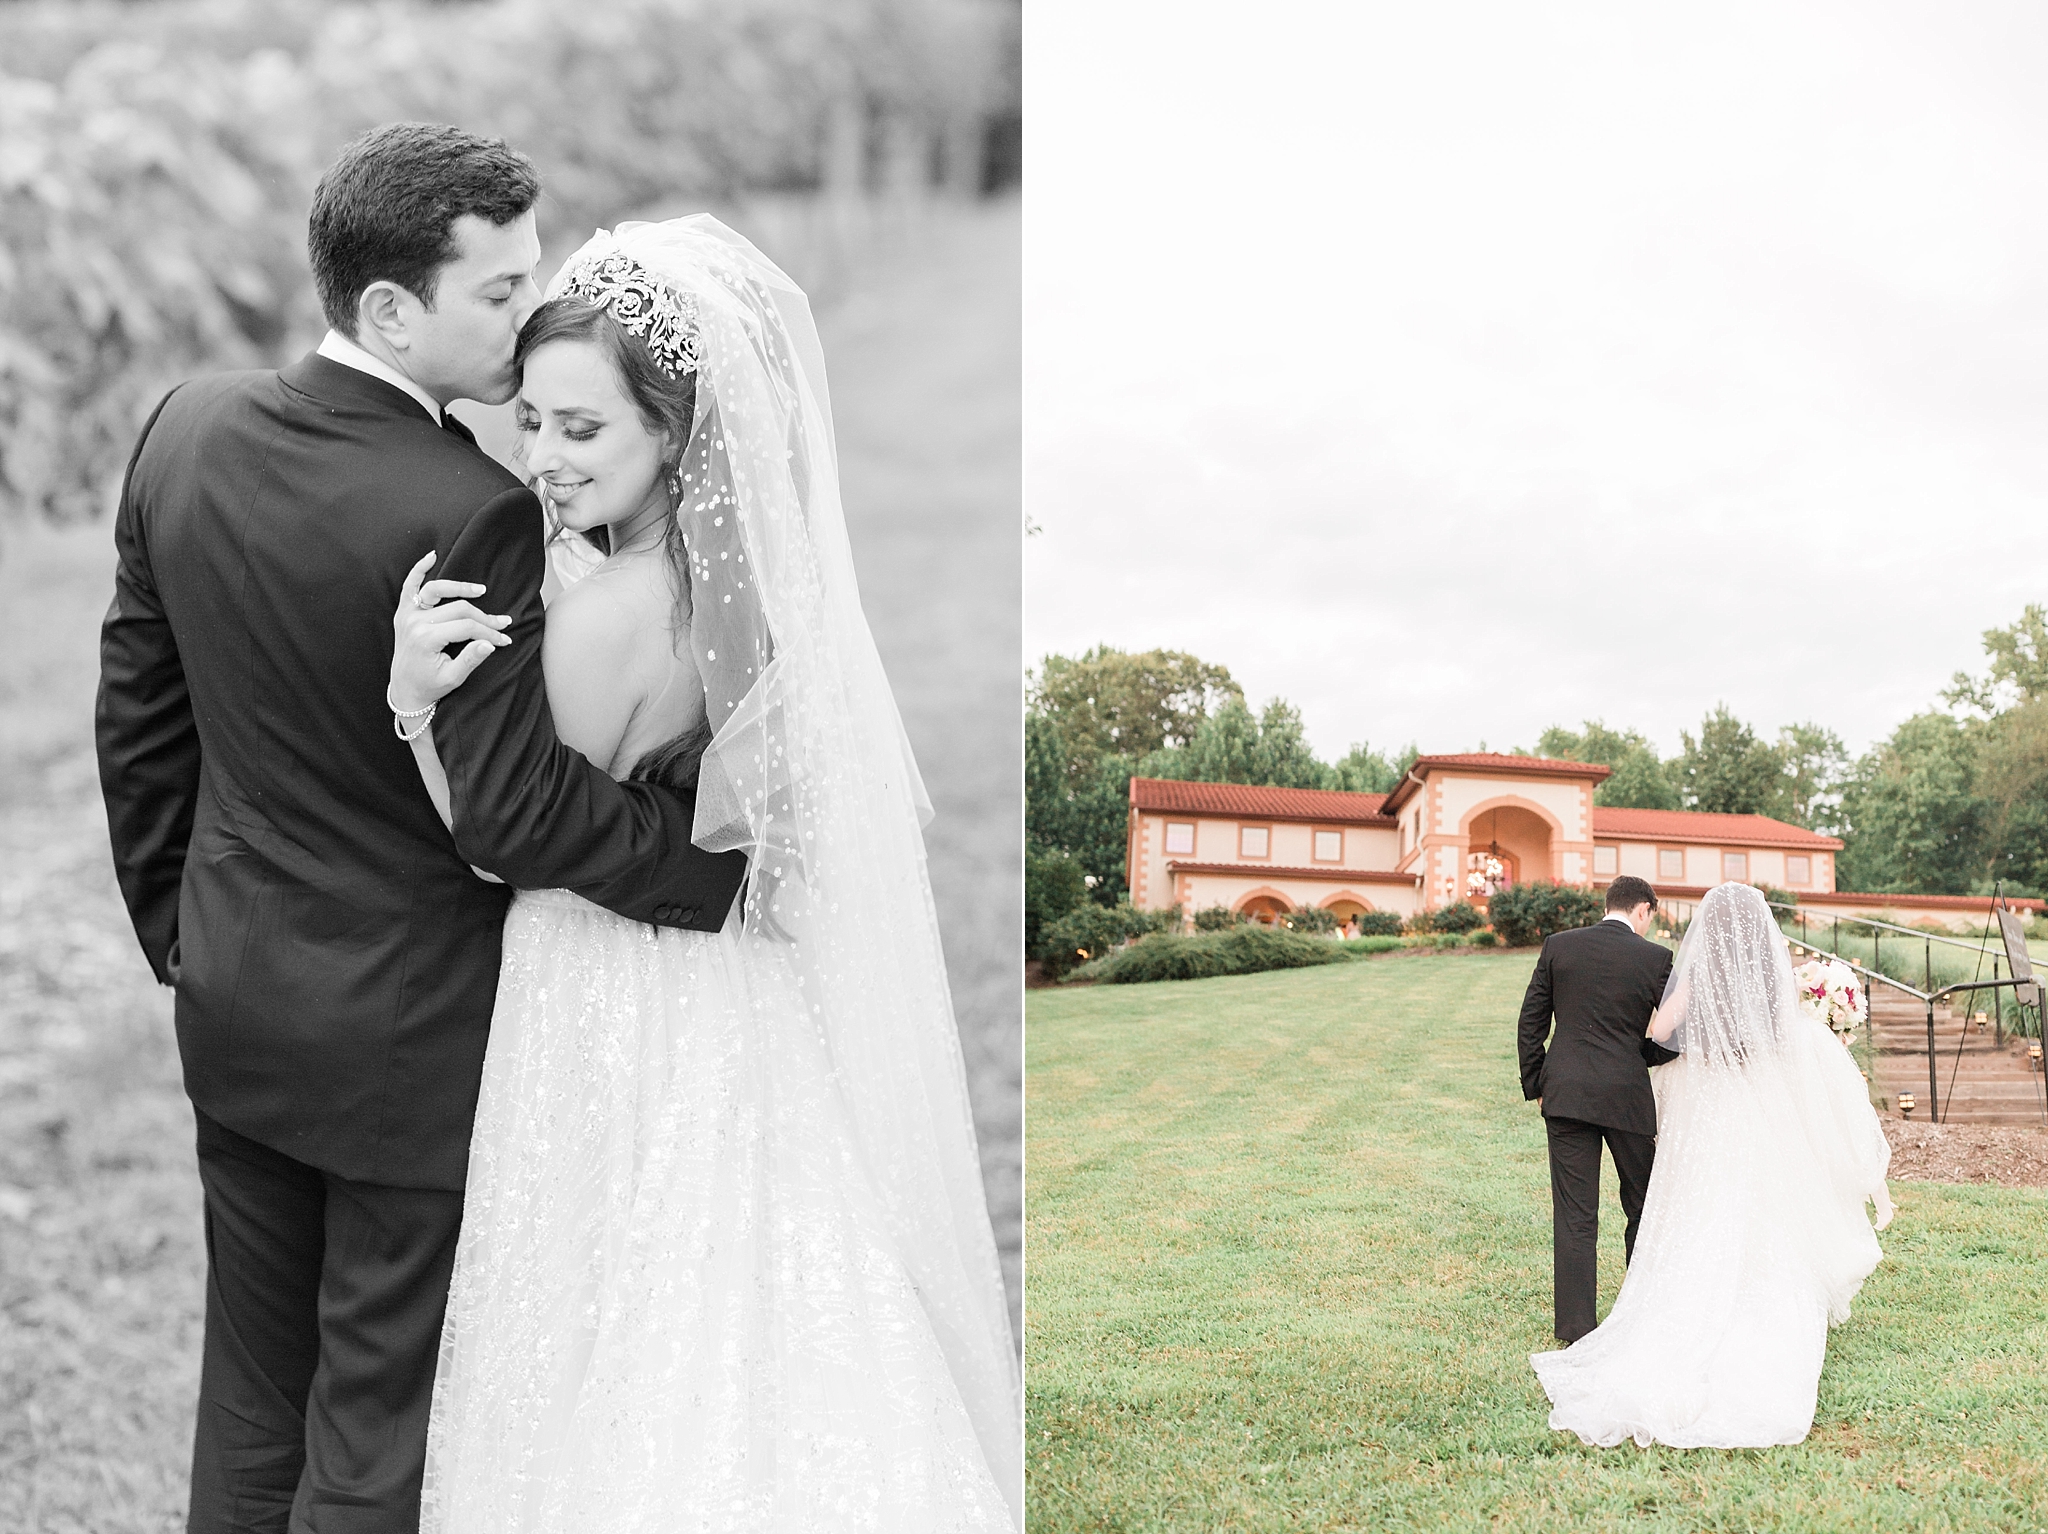 This glamorous summer wedding at Running Hare Vineyard features a palette of blush and gold and is captured by DC photographer Alicia Lacey.